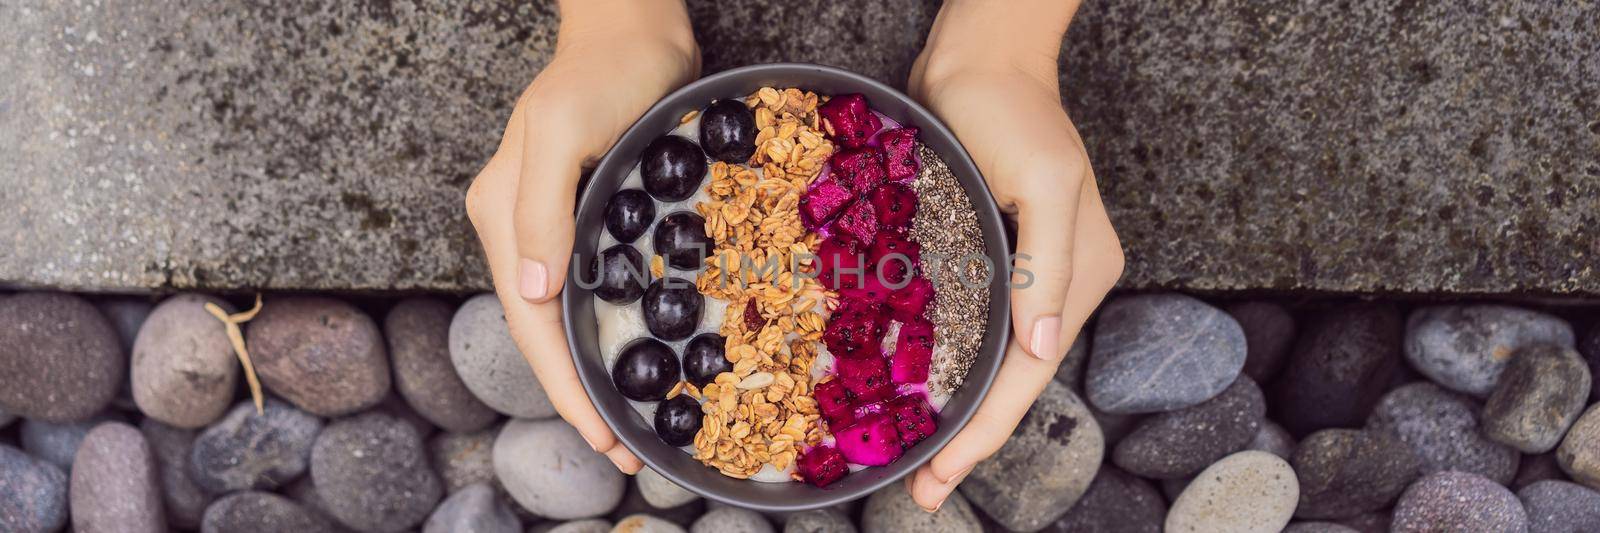 Girl relaxing and eating fruit Smoothie Bowl by the hotel pool. Exotic summer diet. Tropical beach lifestyle BANNER, LONG FORMAT by galitskaya